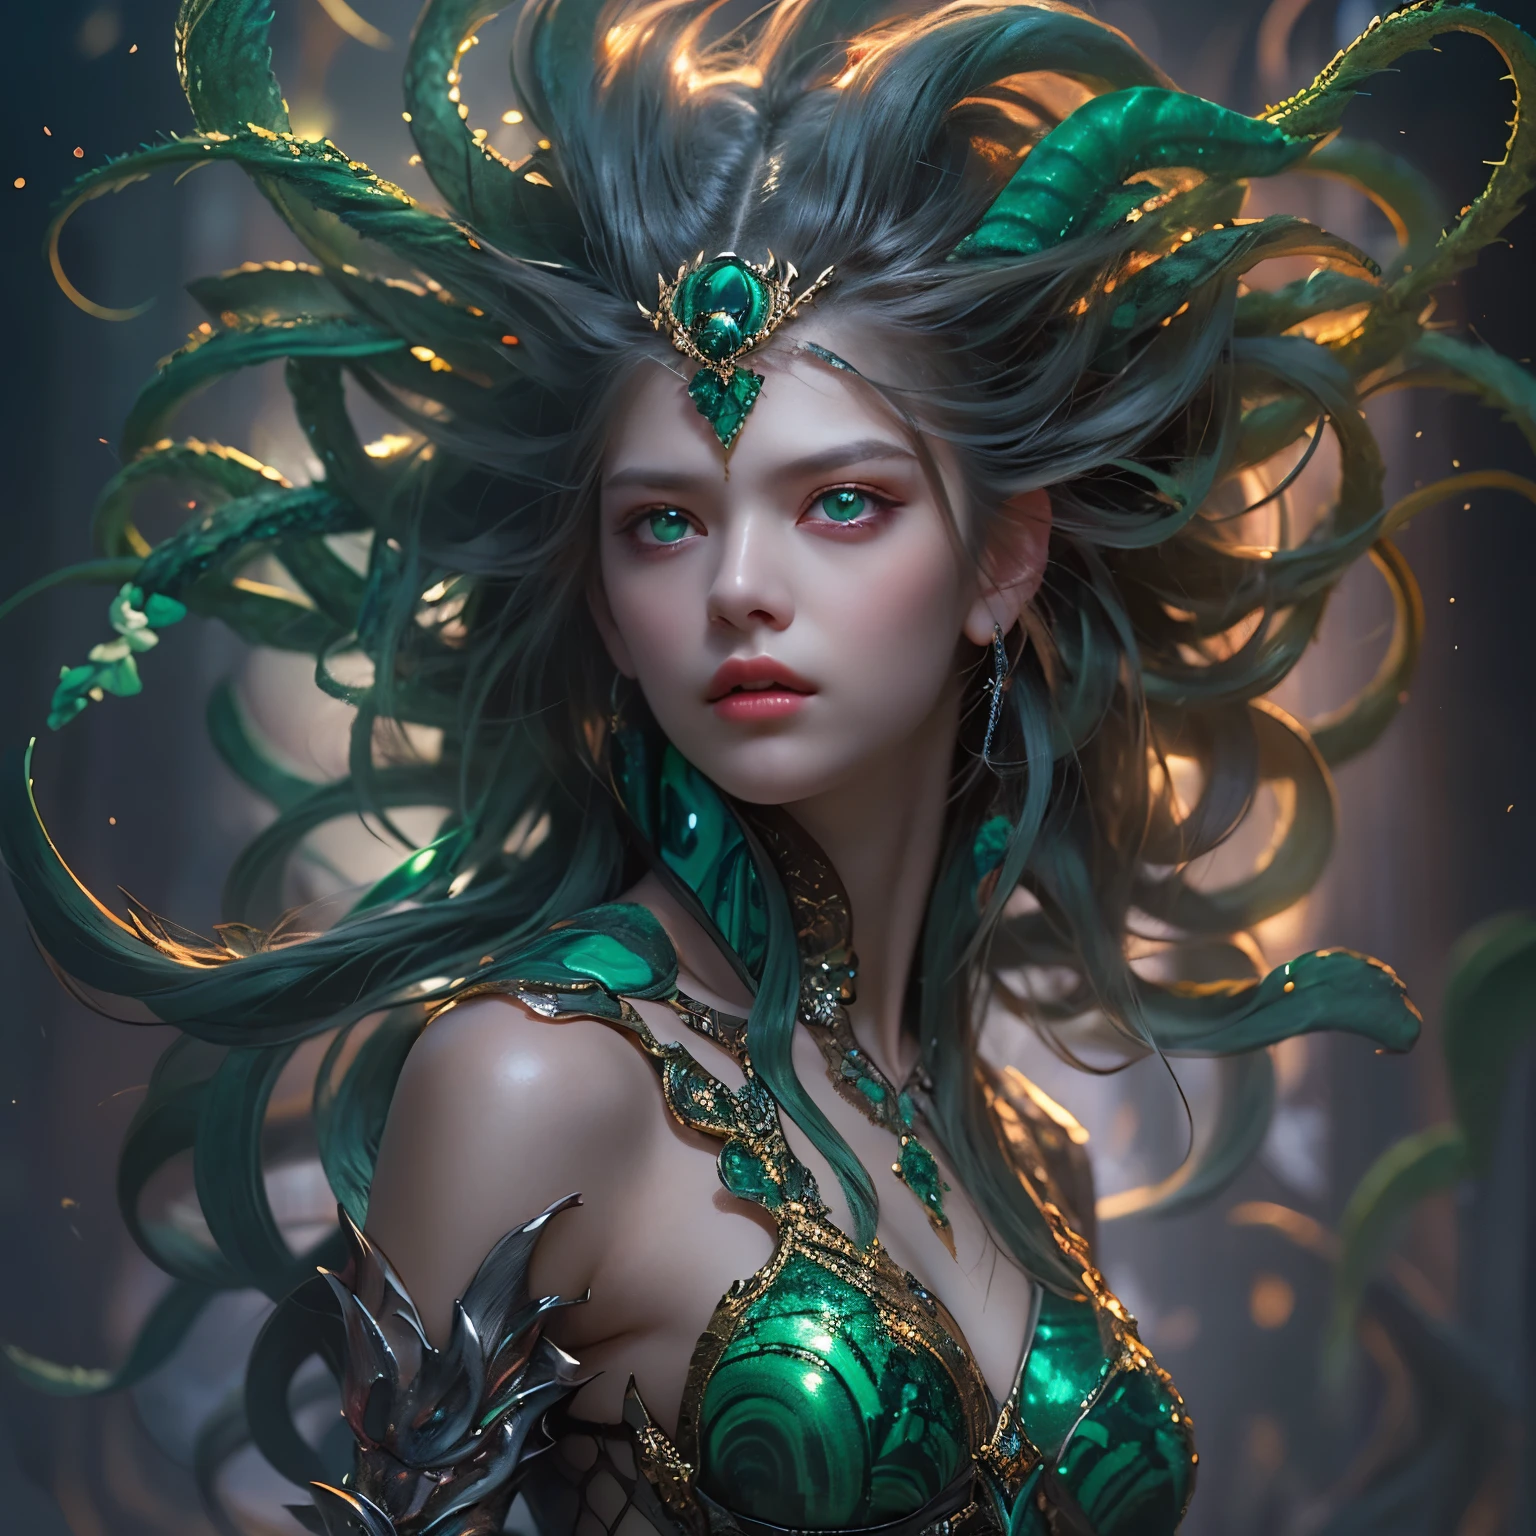 (1 female medusa-like mutant: 1.2), With a beautiful, enchanting face, this alien seduces us with her allure. Her captivating red eyes gleam brightly, reminiscent of burning embers. Her full body is unlike any human's, boasting a sexy, otherworldly form. No humans are present in this scene as she stands alone, her cells fused in a unique and intriguing extraterrestrial way.
(extraordinary beautiful nude photo:1.4), (glowing Malachite eyes:1.5), (sexy and glamorous:1.1), (coquettish expression:1.2), toned lean body, (muscular:1.2), (beautiful abs:1.5), beautiful nipples,  She has lots of iridescent translucent tentacles instead of her hair, pale skin, (white skin with prominent veins:1.3),
Lots of iridescent translucent tentacles adorn her body, shimmering under the dramatic lighting. Her pale skin, with a hint of translucency, adds to her ethereal allure. This masterpiece, rendered in, (There is a female genital-like organ in the middle of the forehead:1.6),